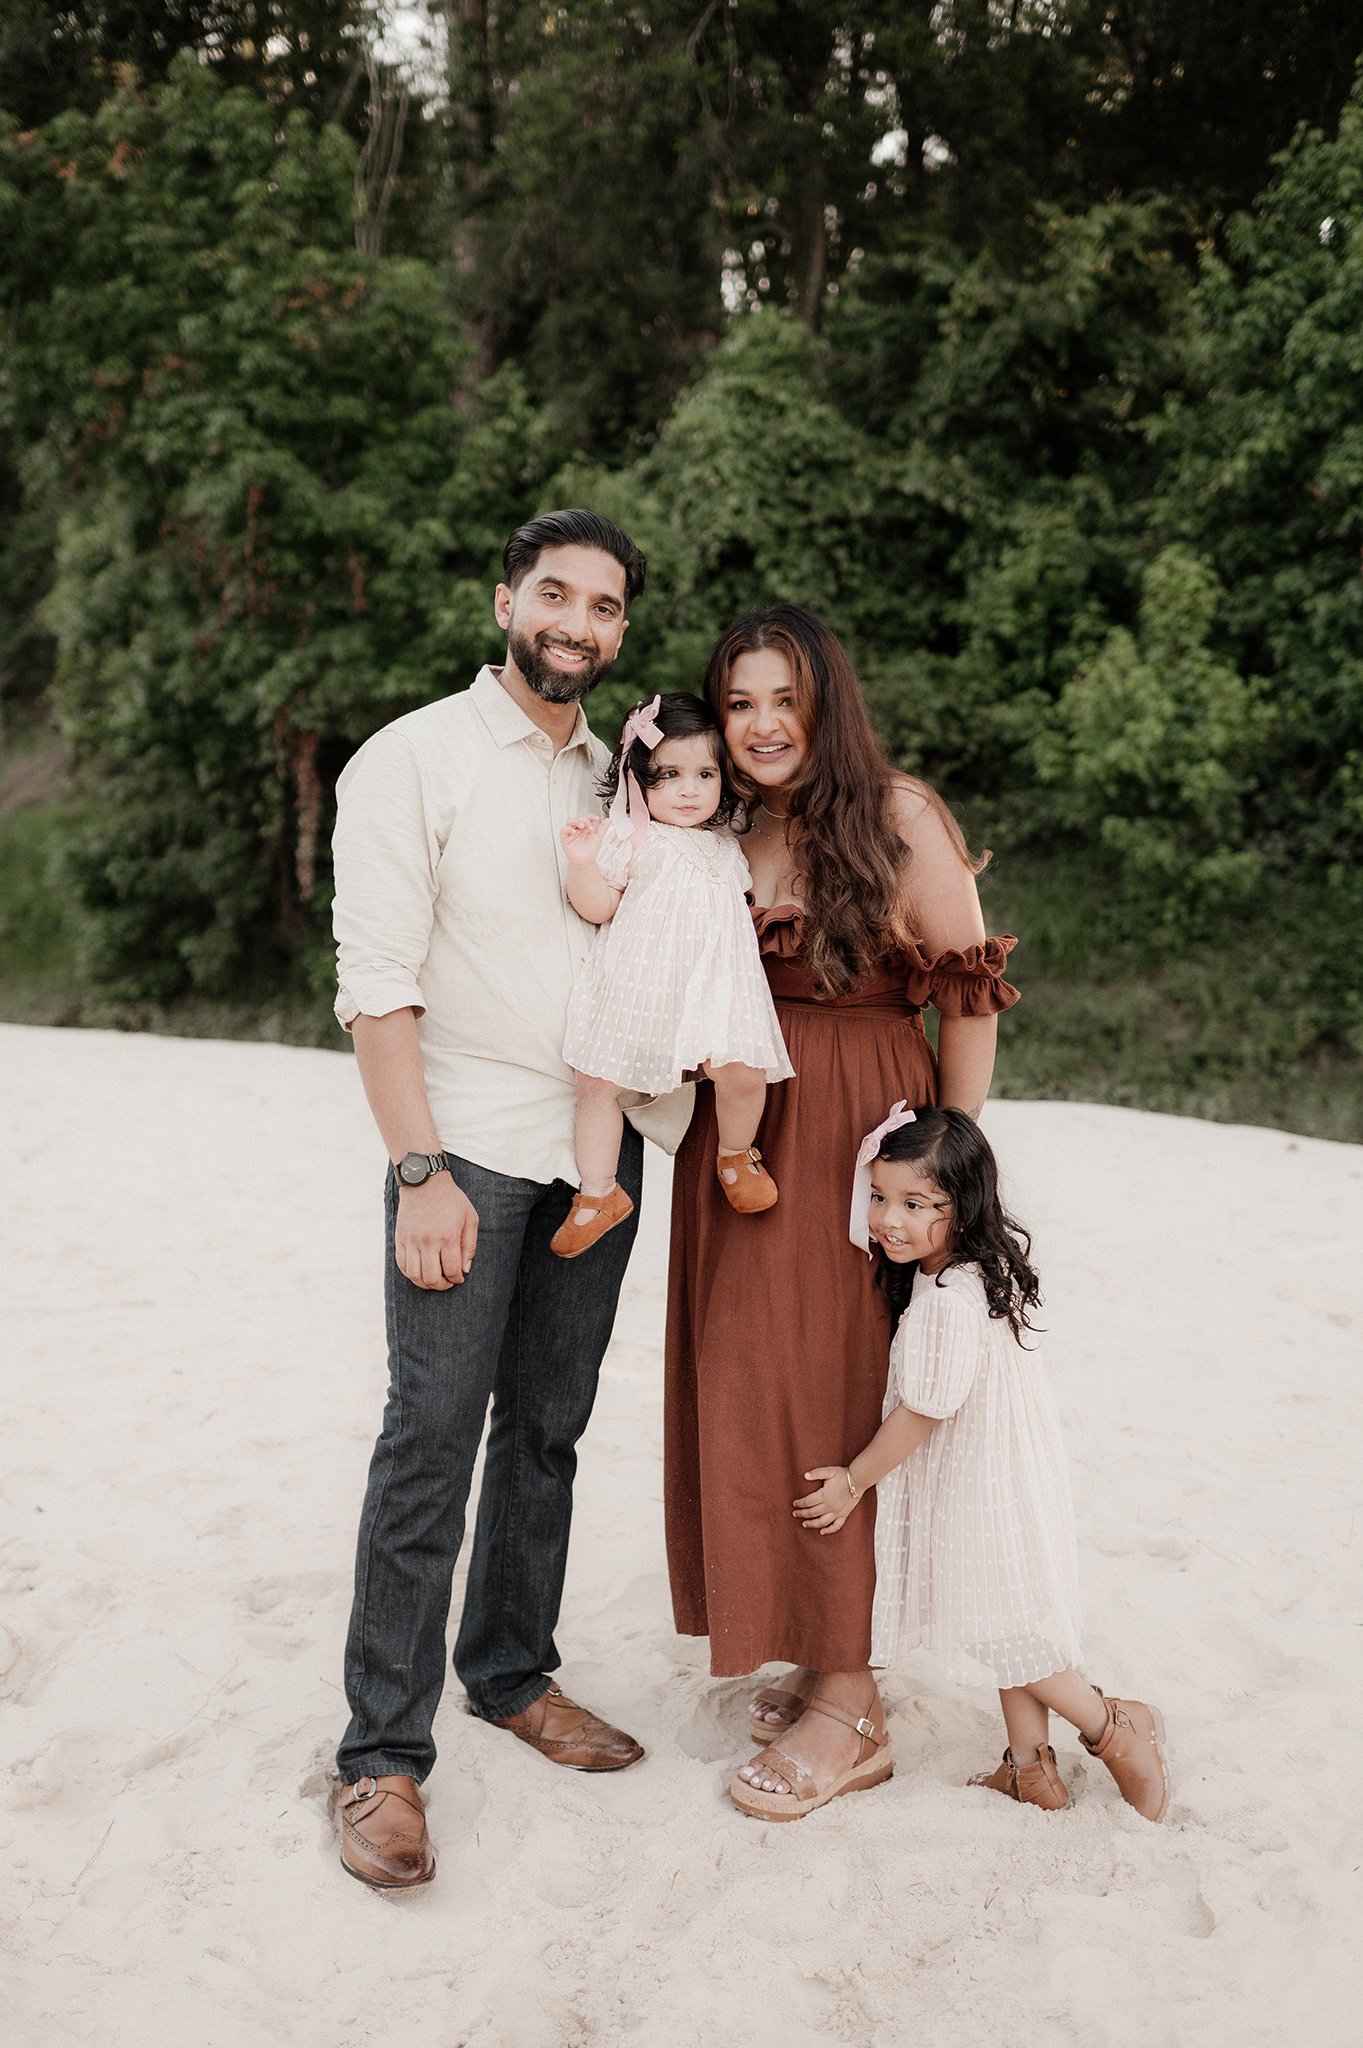 the woodlands family photographer _ conroe photographer _ houston family photographer _ ashley gillen photography _ texas family photographer _ conroe wedding photographer _ conroe texas _ cshi43.jpg